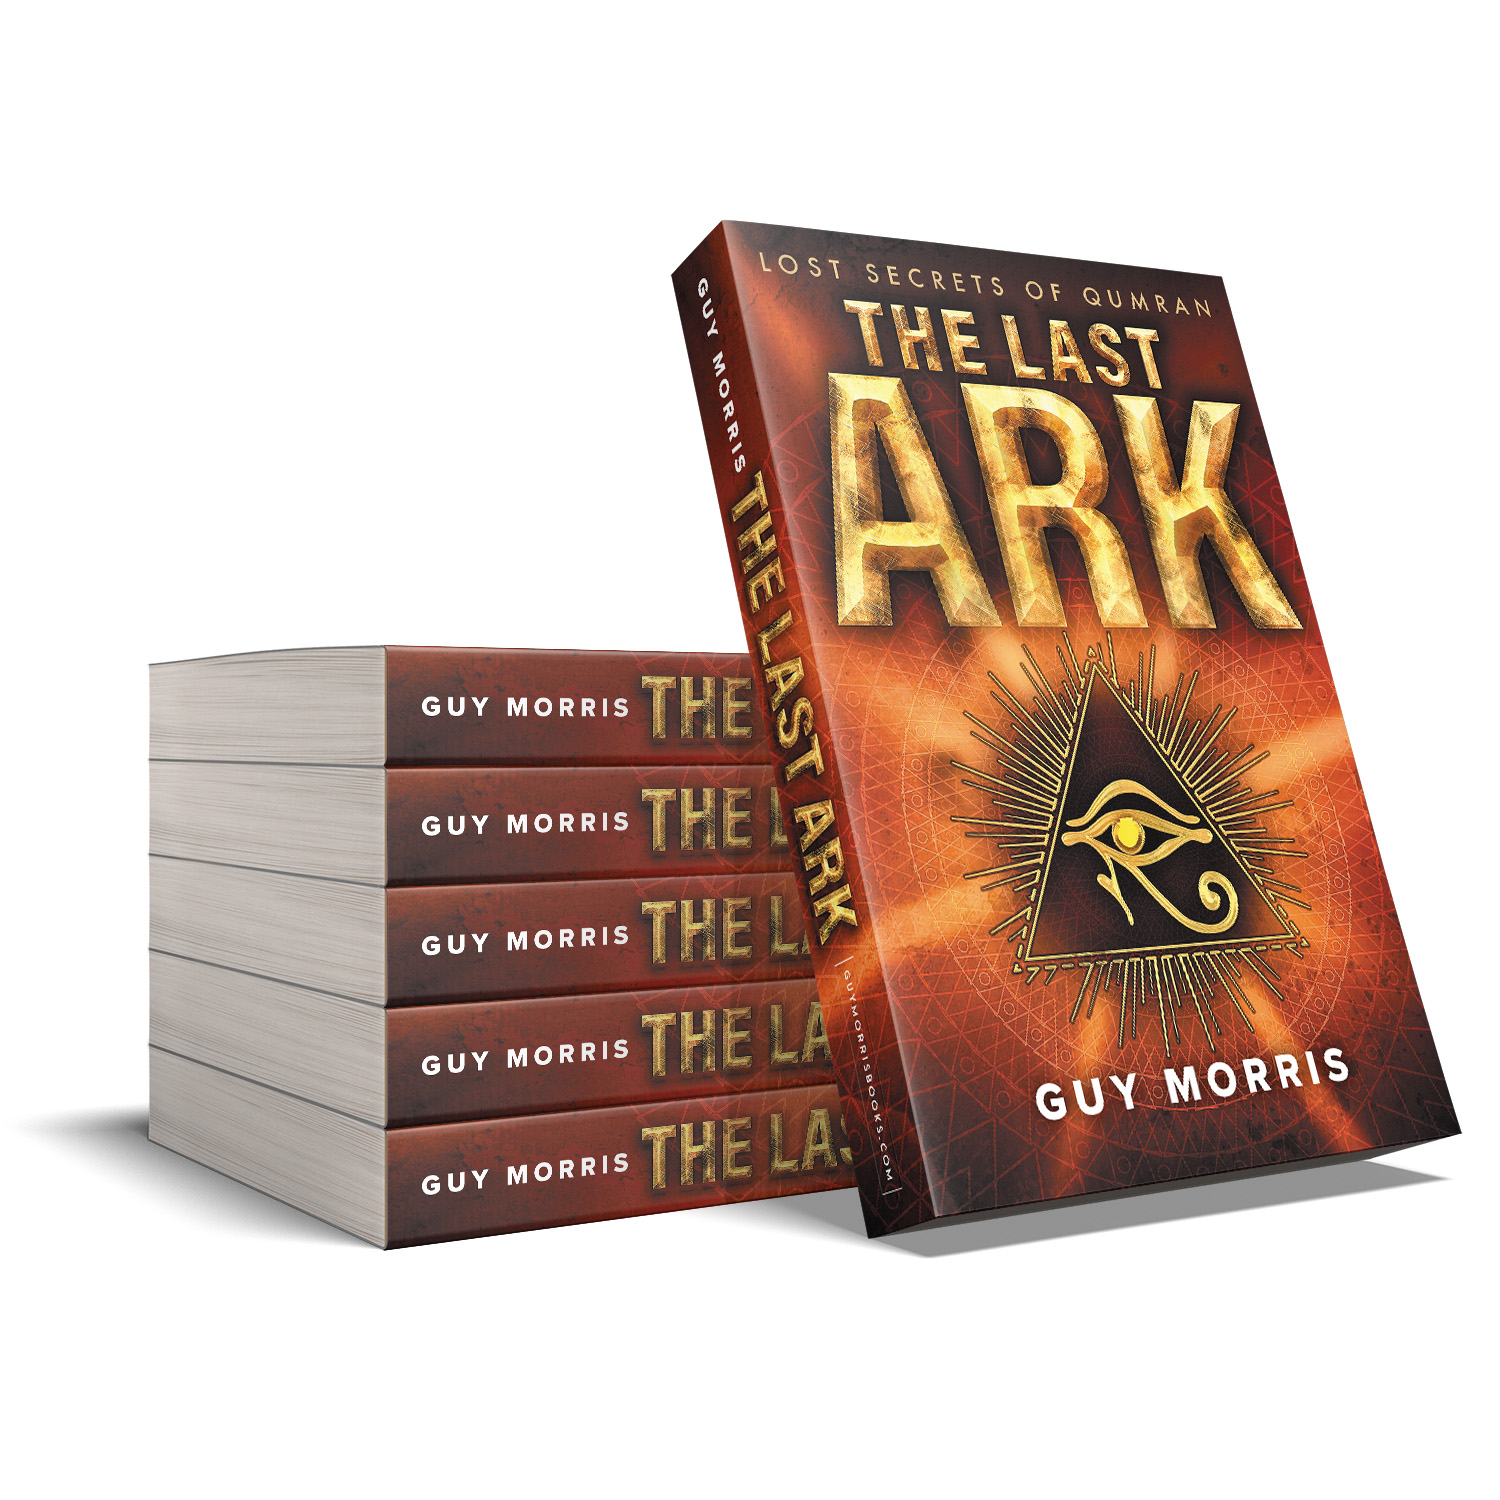 'The Last Ark' is a thrilling hybrid cyber thriller action thriller novel. The author is Guy Morris. The book cover design & interior formatting are by Mark Thomas. To learn more about what Mark could do for your book, please visit coverness.com.